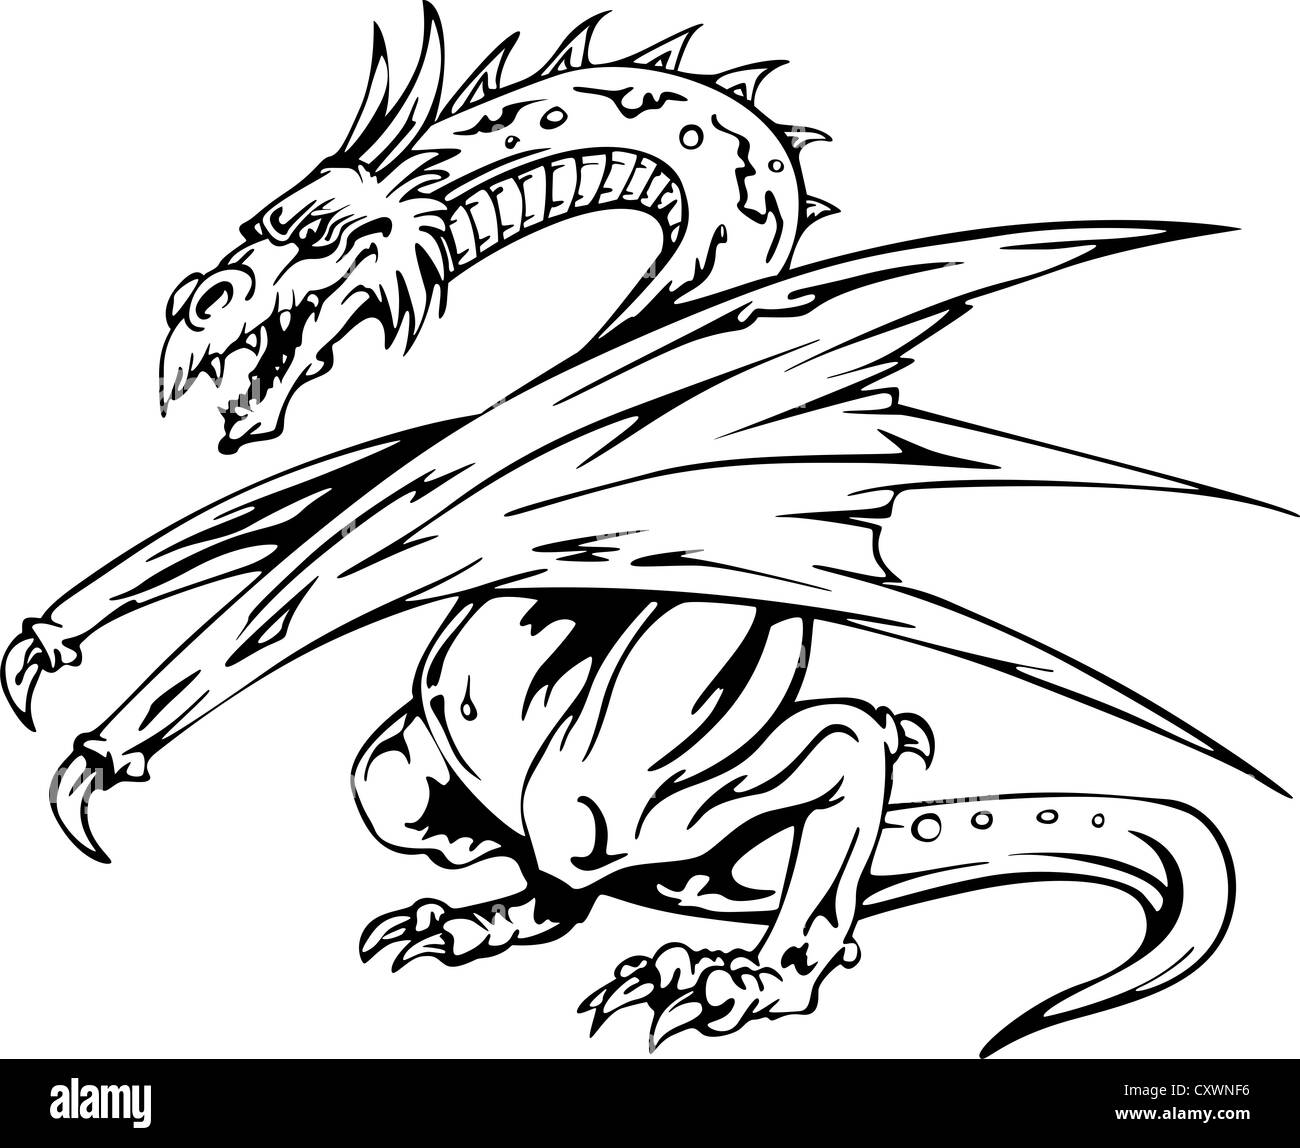 Dragon tattoo. Back and white vector illustrations. Stock Photo